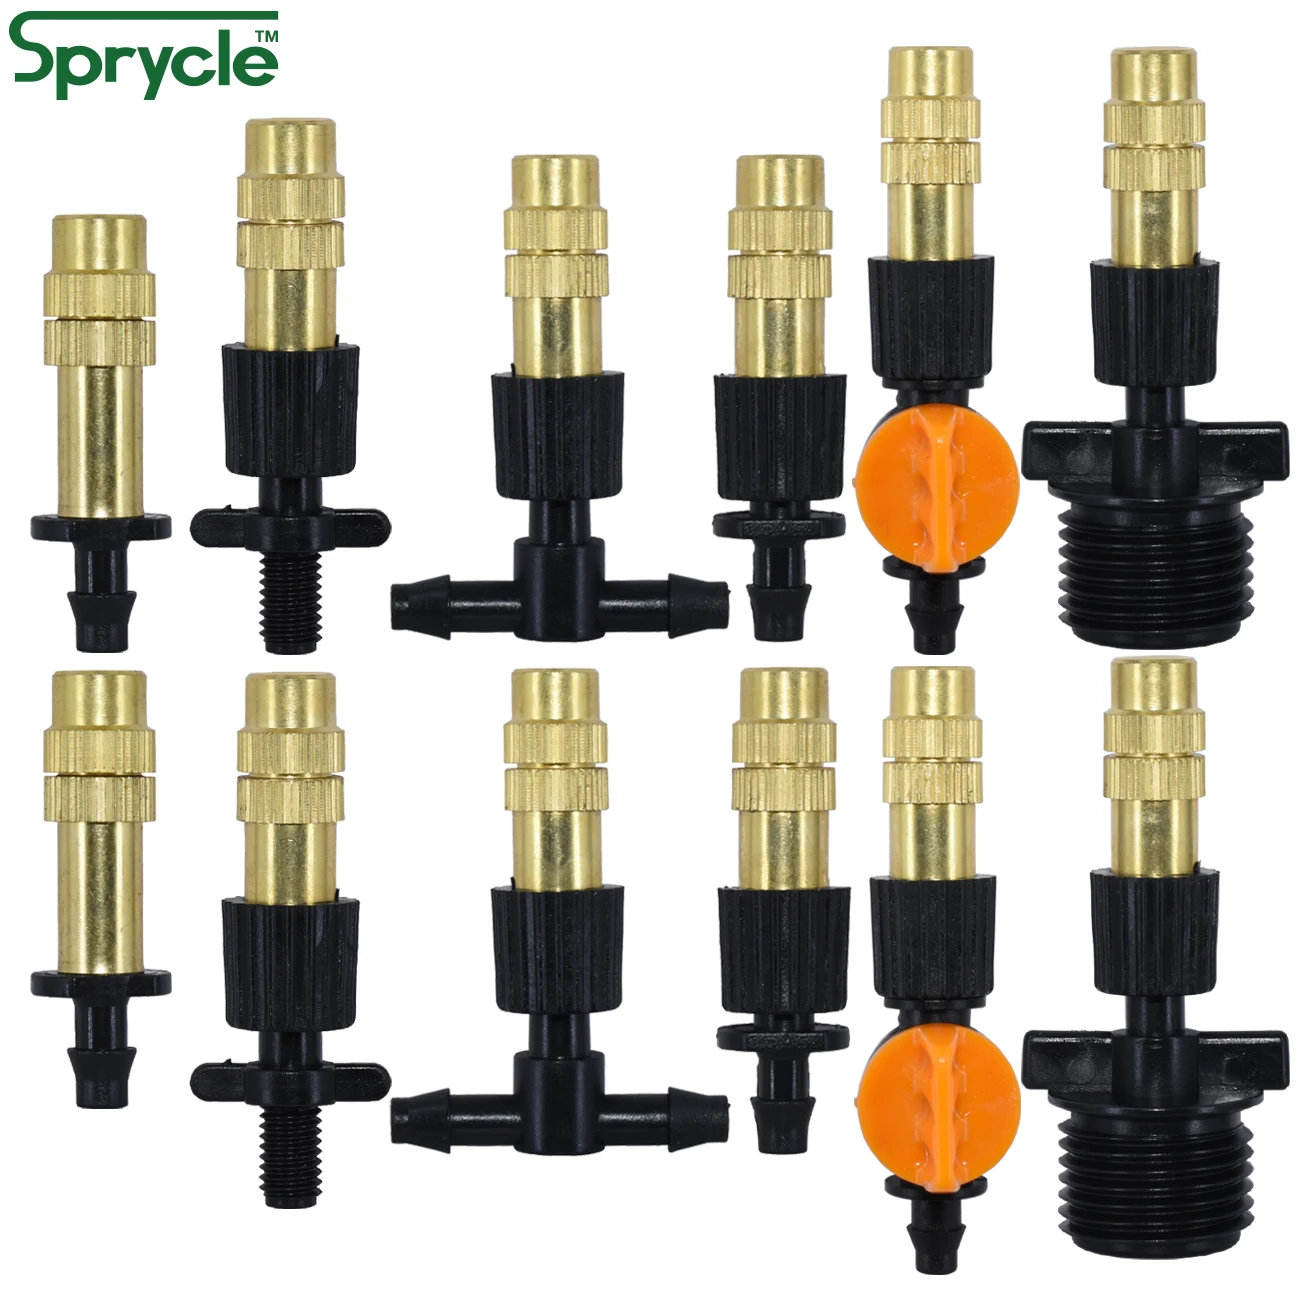 

SPRYCLE 10PCS 6 Types Micro Drip Irrigation Misting Brass Nozzle Garden Spray Cooling Copper Sprinkler w/ Connector Water Plants